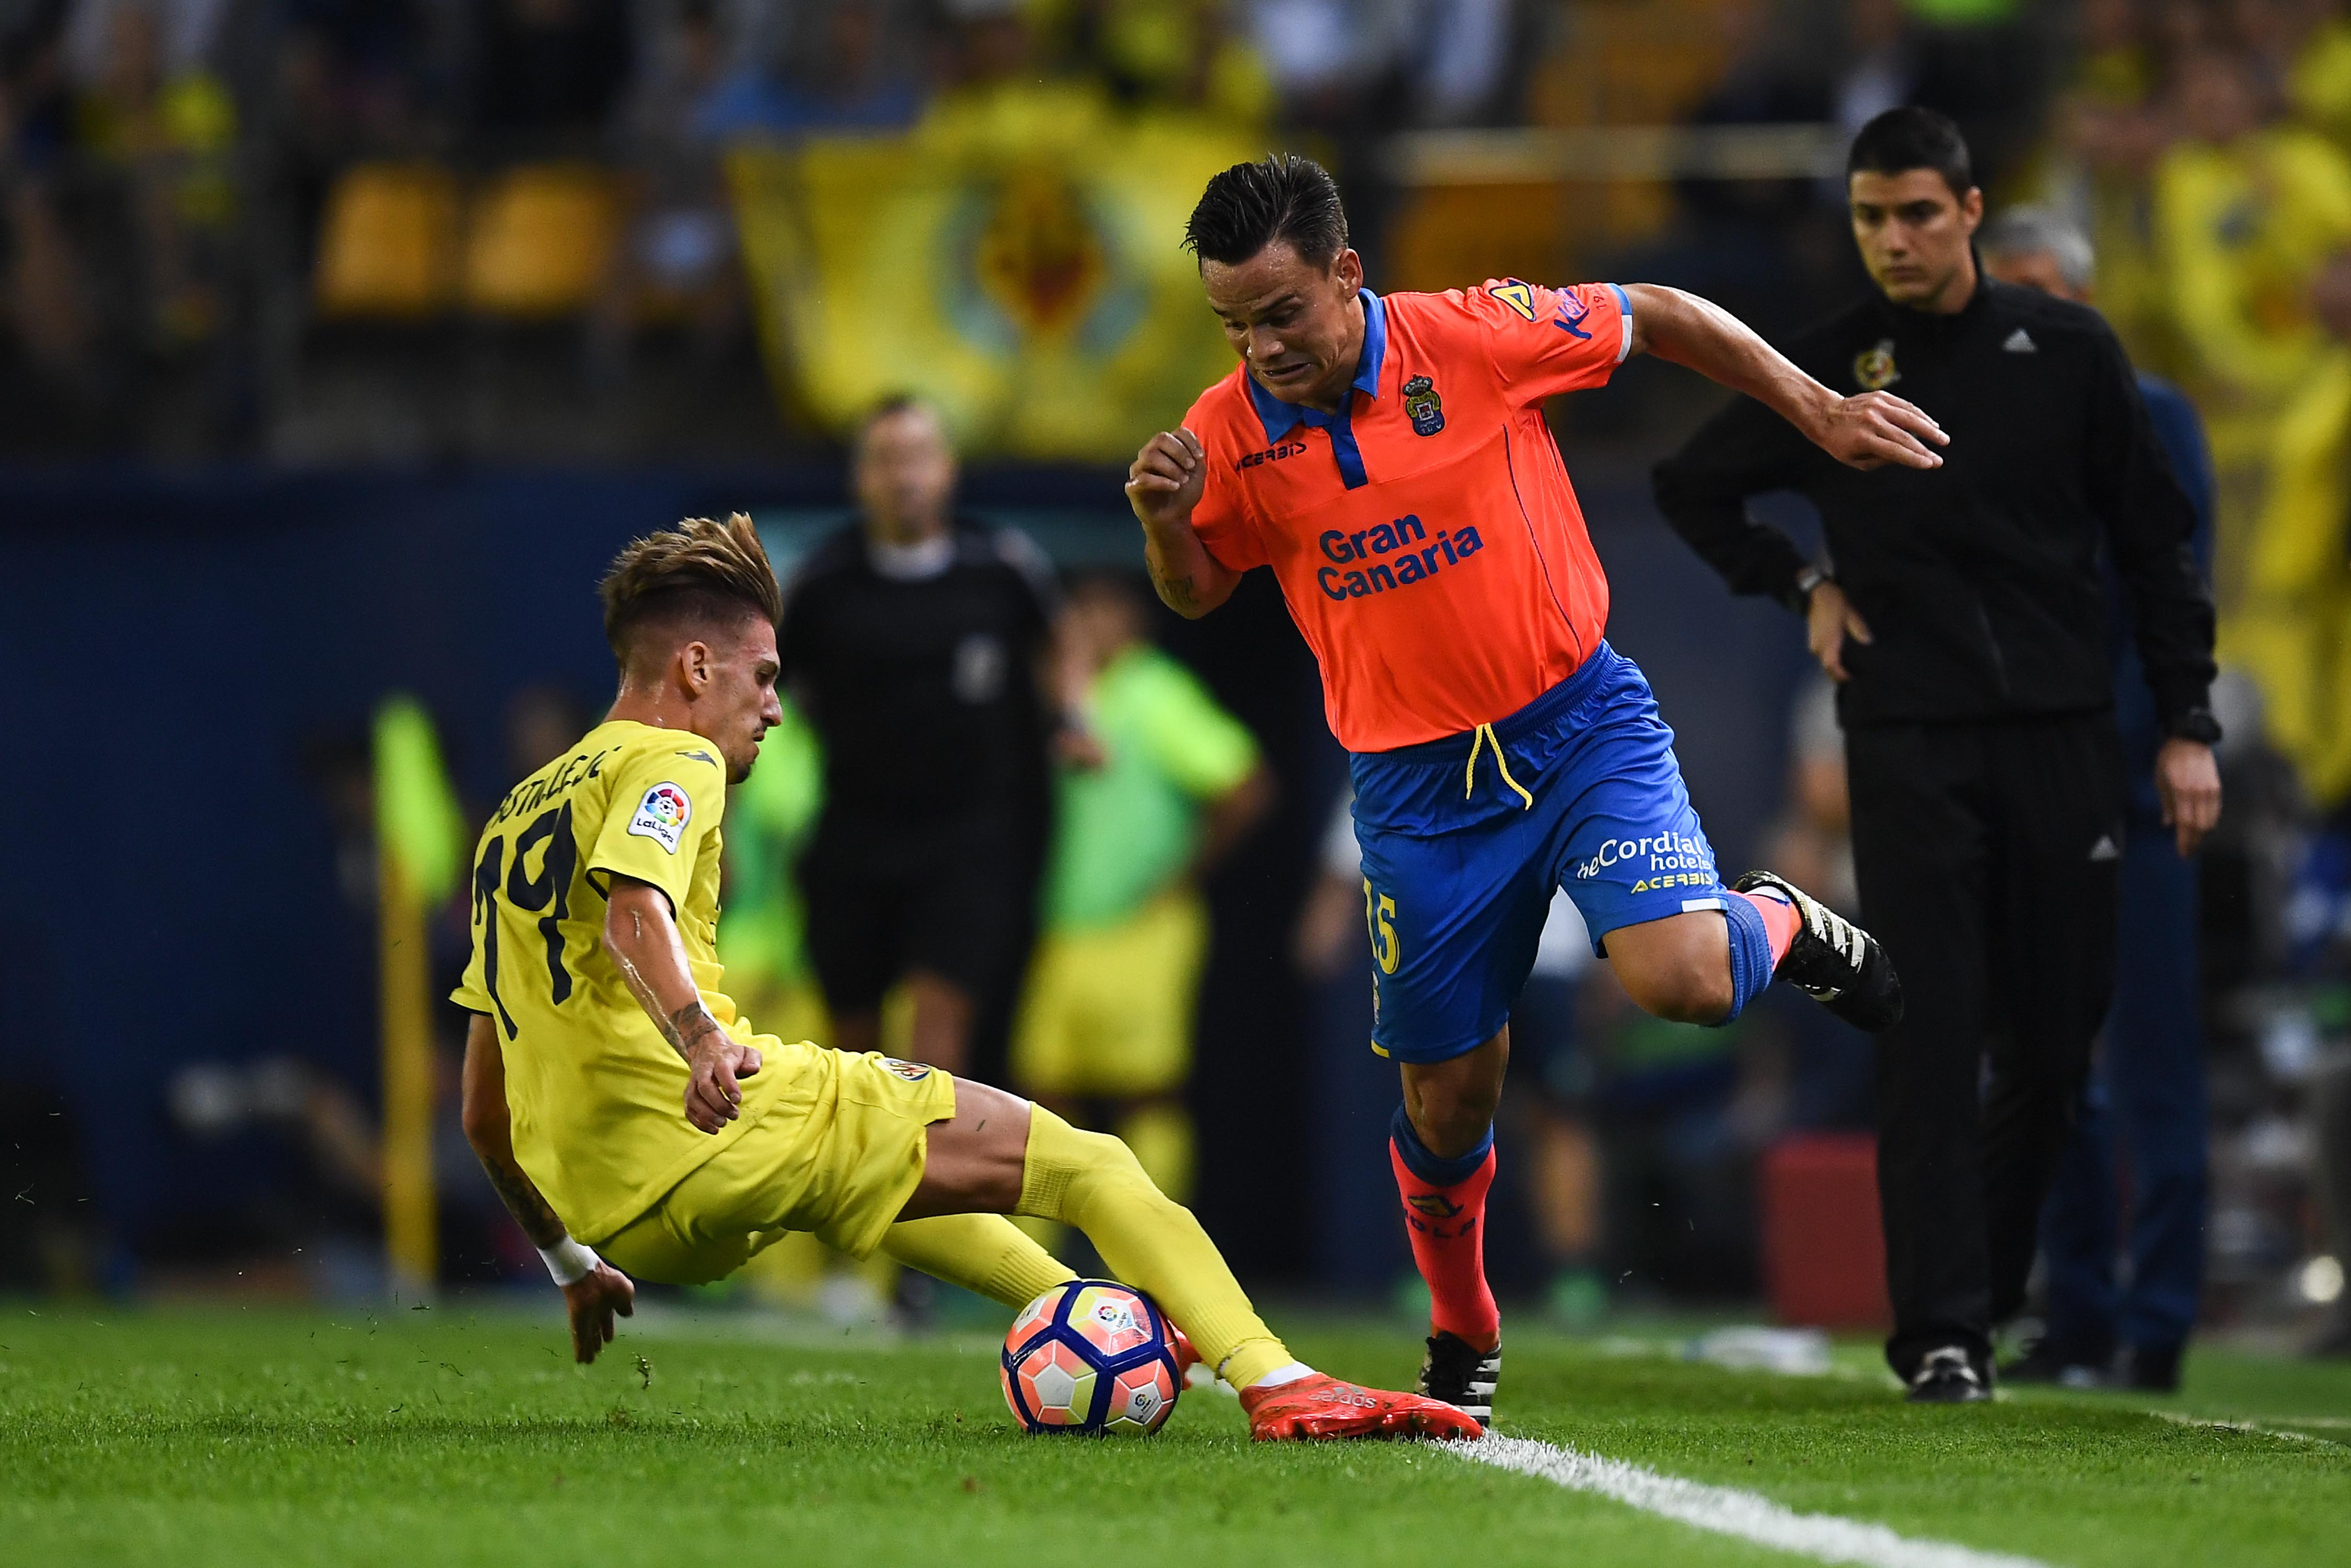 VILLARREAL, SPAIN - OCTOBER 23:  Roque Mesa (R) of UD Las Palmas competes for the ball with Samu Castillejo of Villarreal CF during the La Liga match between Villarreal CF and UD Las Palmas at El Madrigal stadium on October 23, 2016 in Villarreal, Spain.  (Photo by David Ramos/Getty Images)